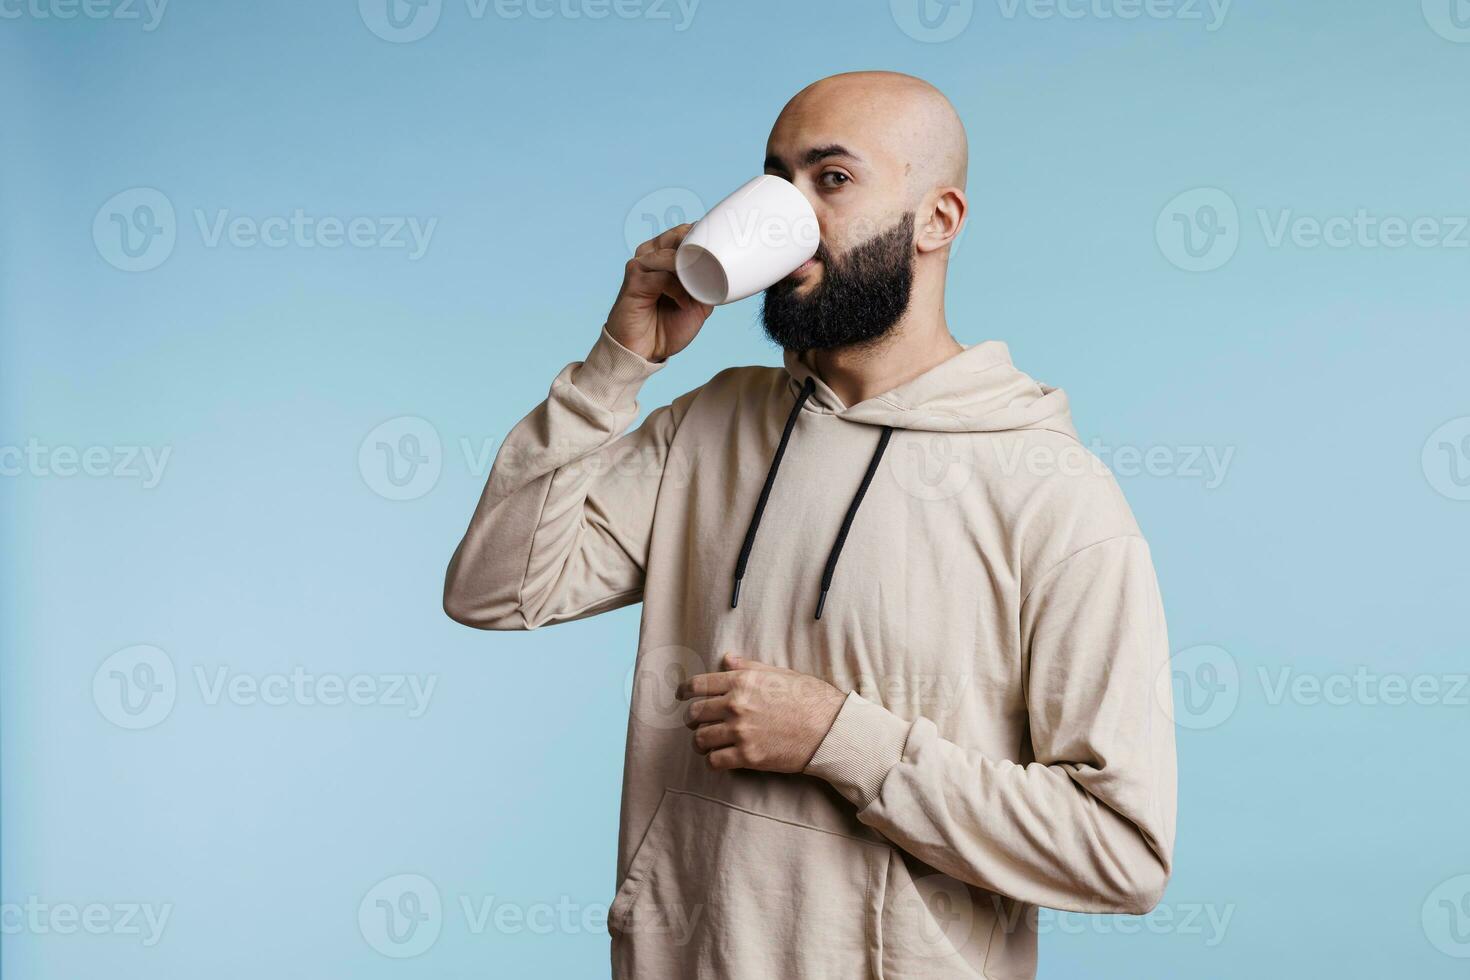 Young arab man drinking coffee from white cup and looking at camera. Arabian bald bearded person wearing casual clothes sipping tea, enjoying hot beverage from mug studio portrait photo